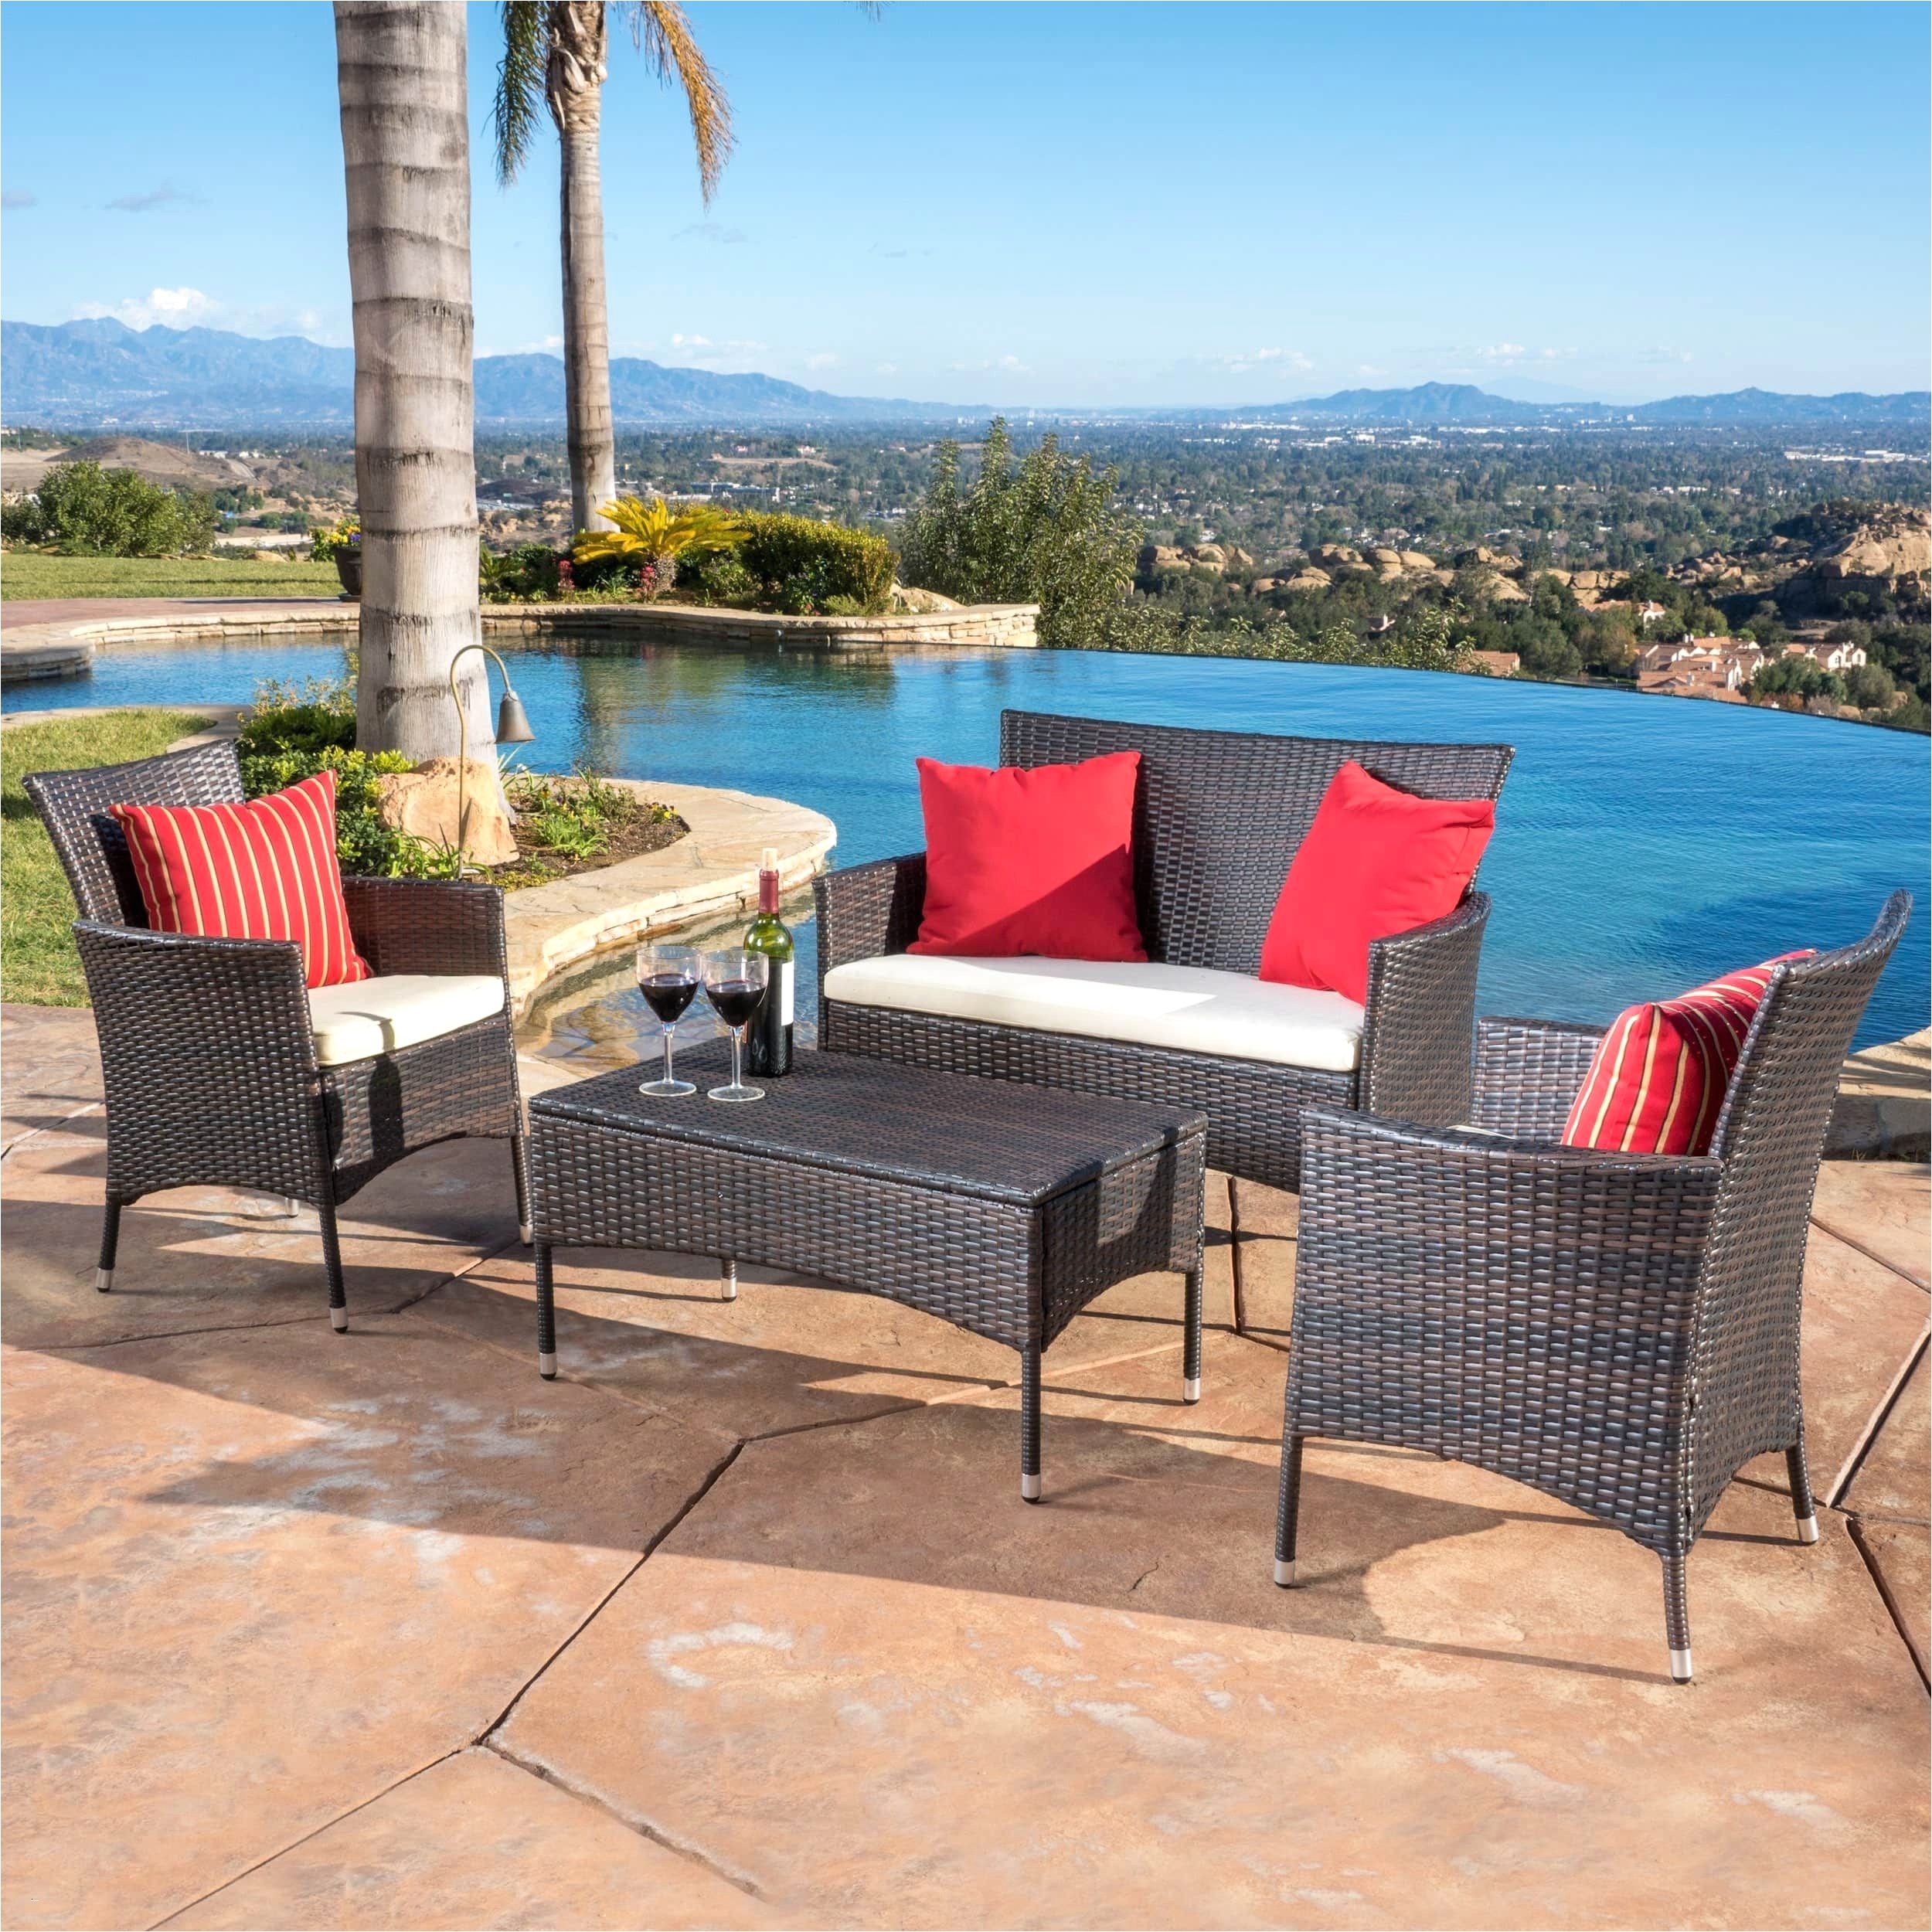 target outdoor furniture clearance lovely outdoor furniture tar inspirational 30 beautiful tar patio table